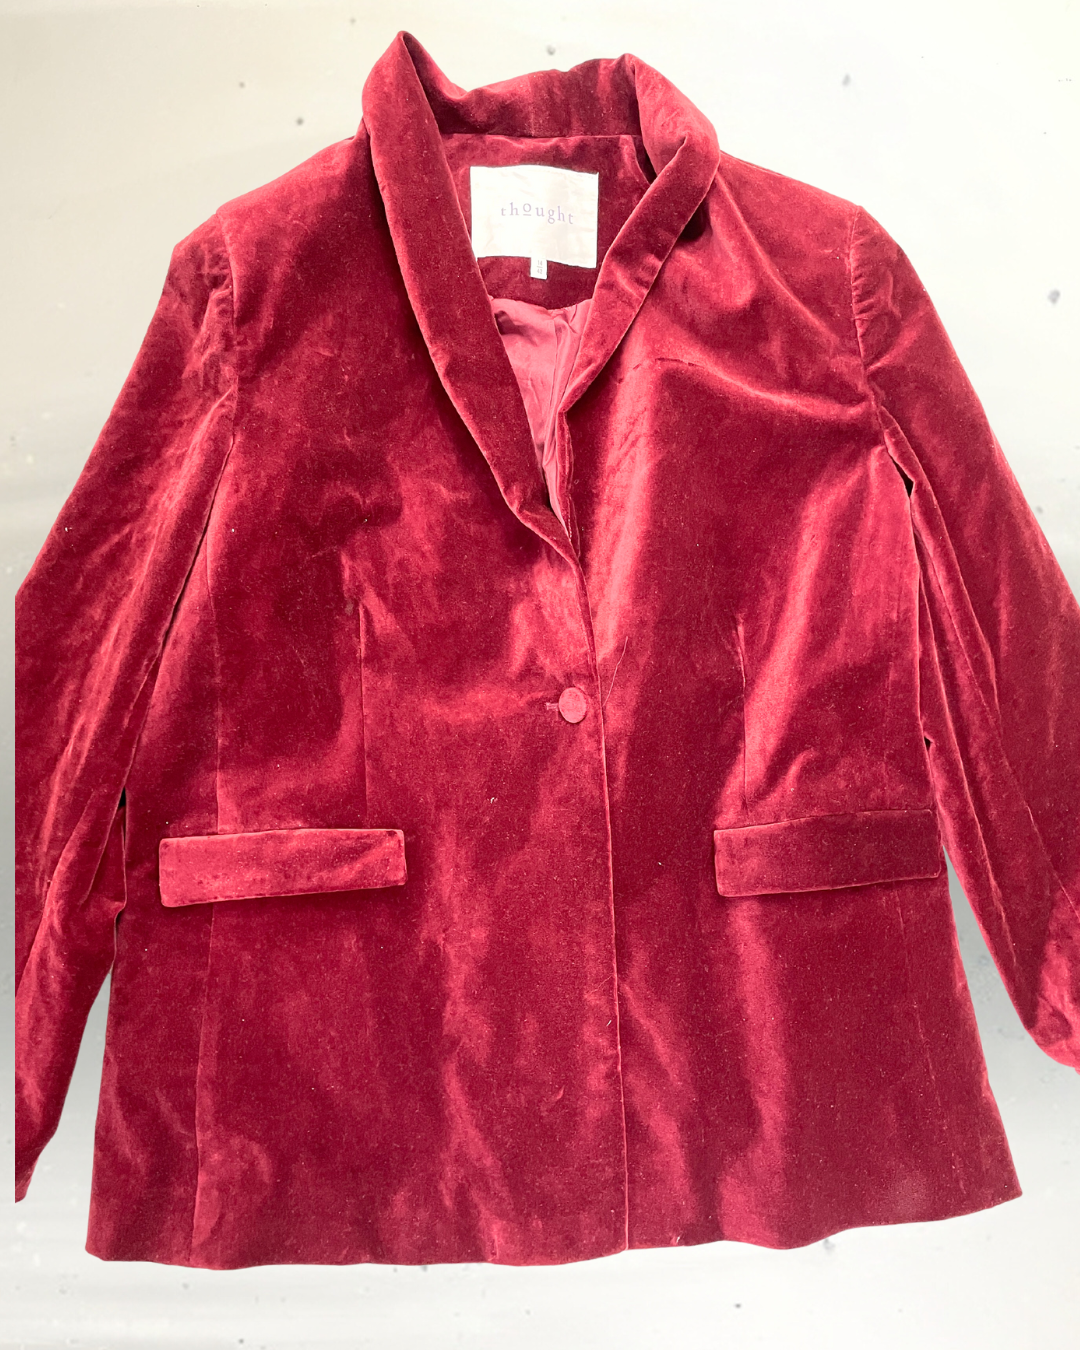 second hand Thought Red Velor Velvet Suit Jacket (size 14) + Trousers (size 16) set.  40 OWNI